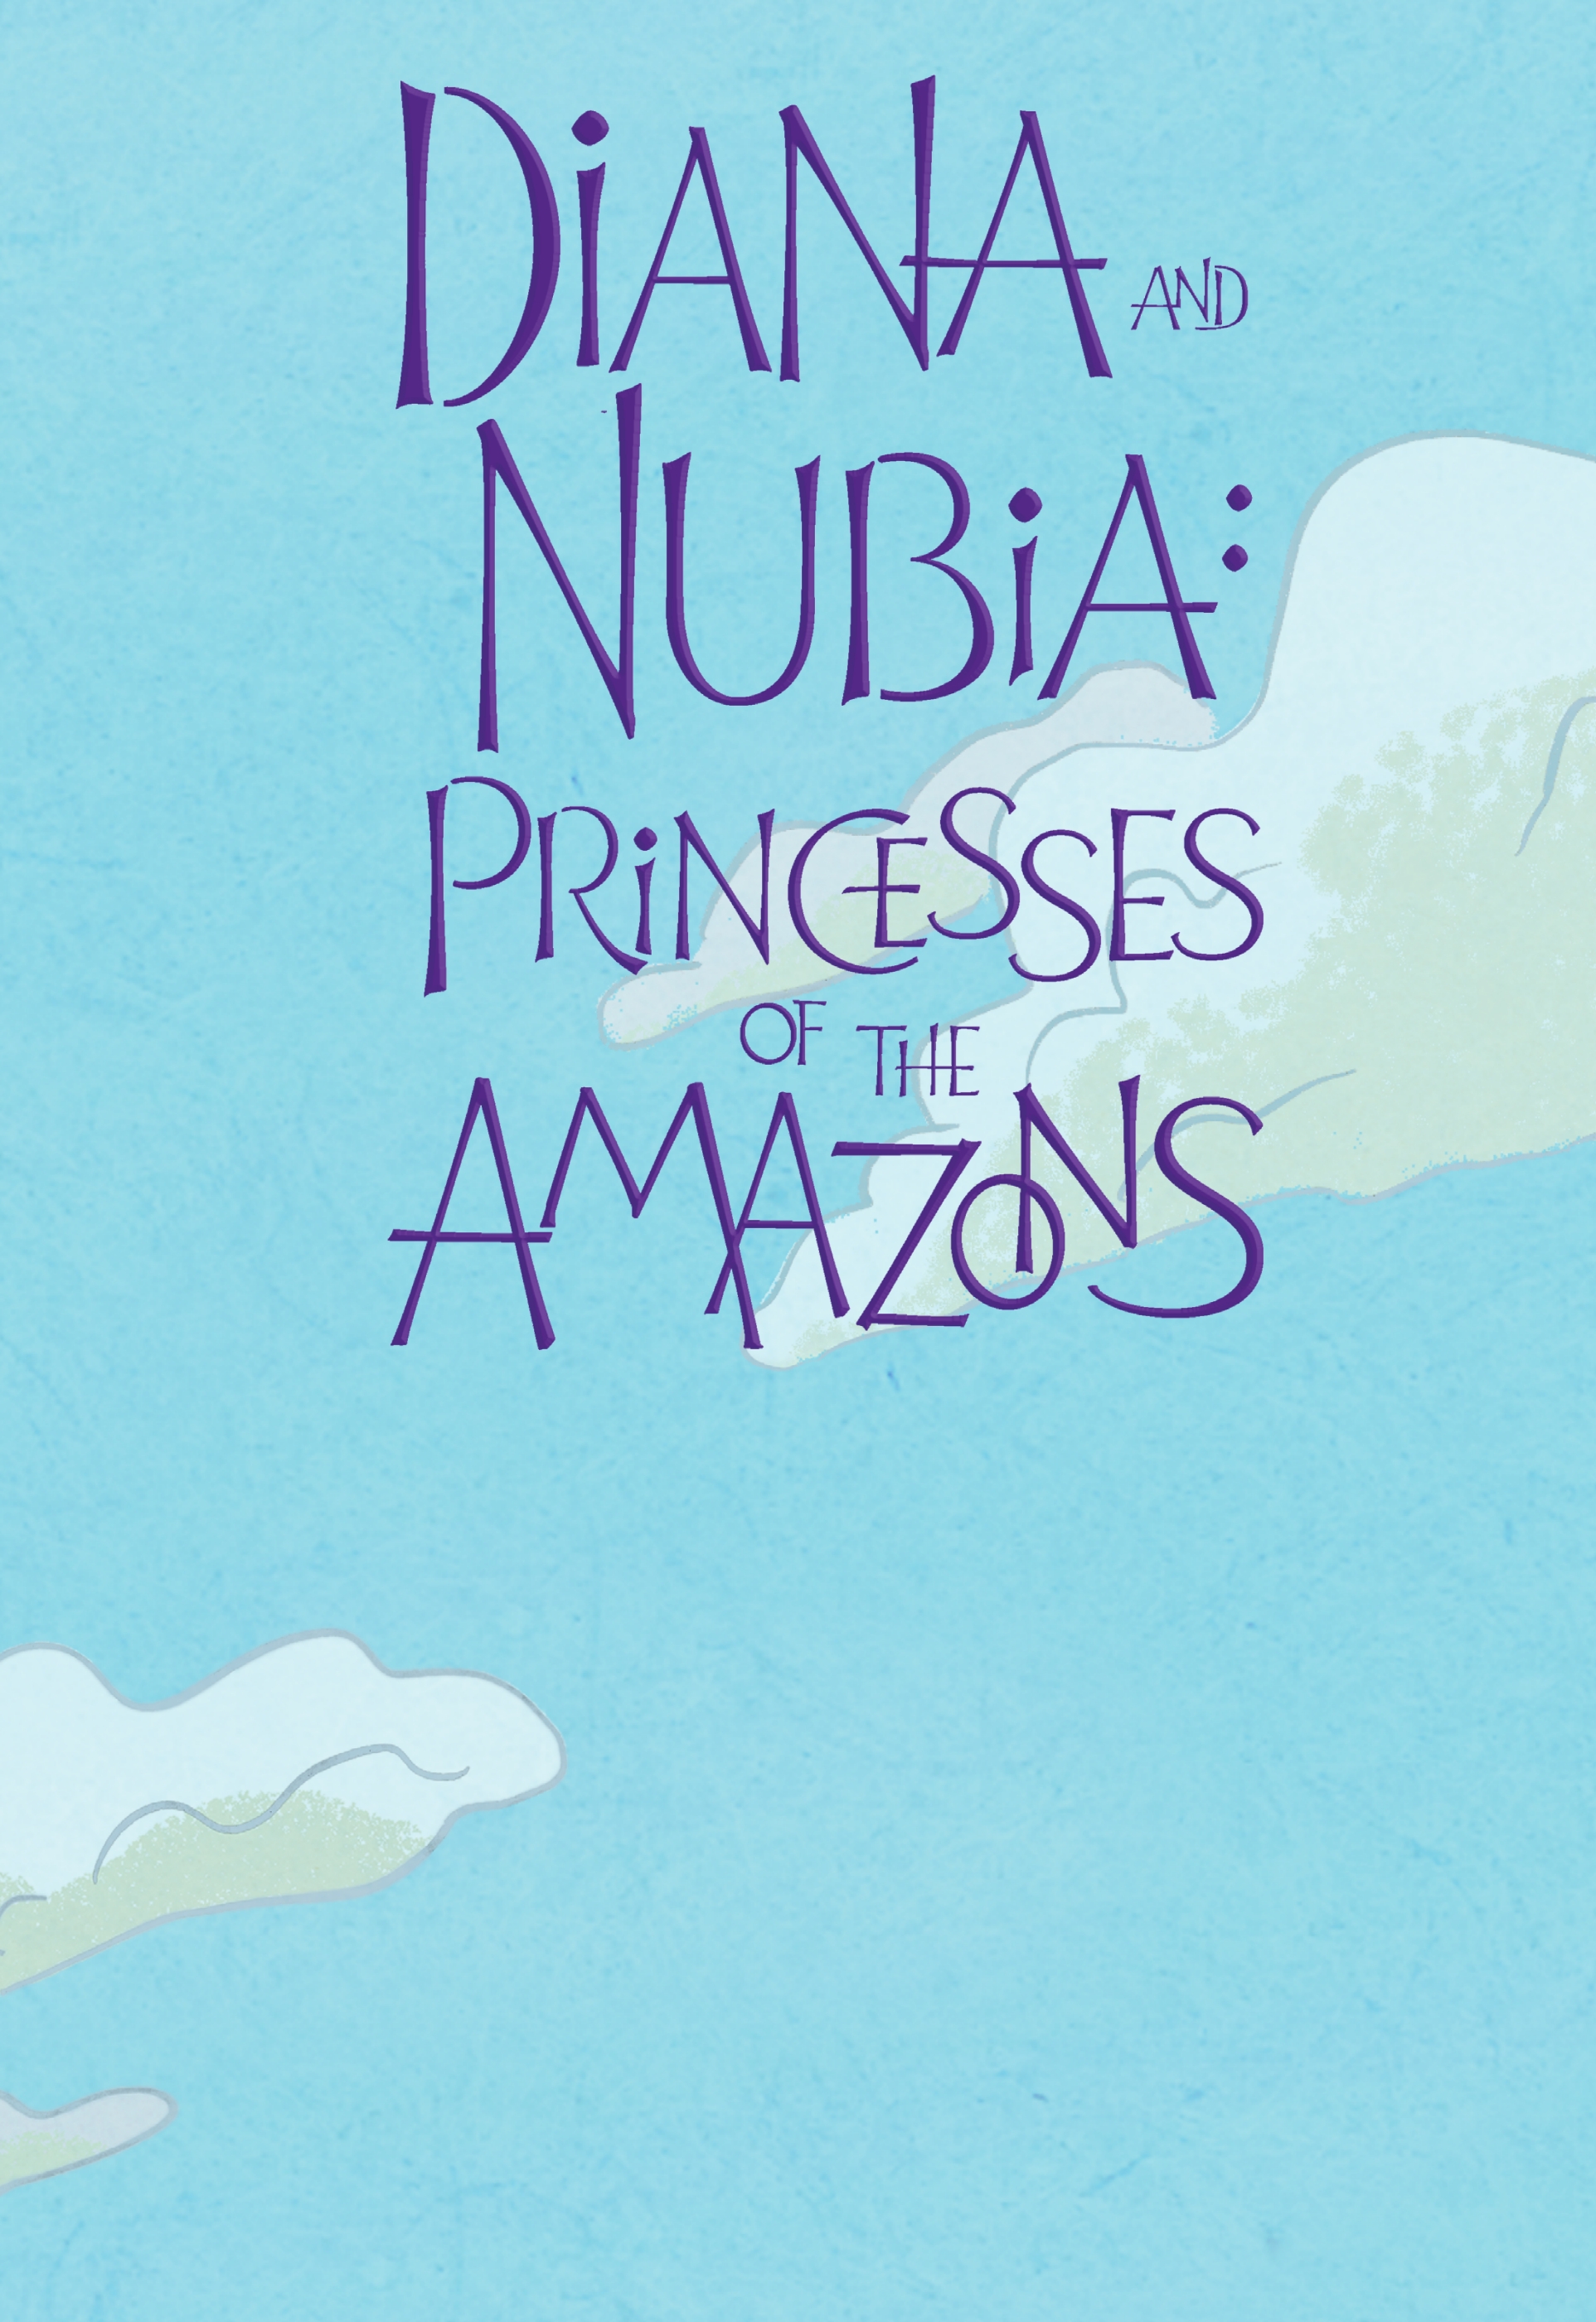 Read online Diana and Nubia: Princesses of the Amazons comic -  Issue # TPB (Part 1) - 2